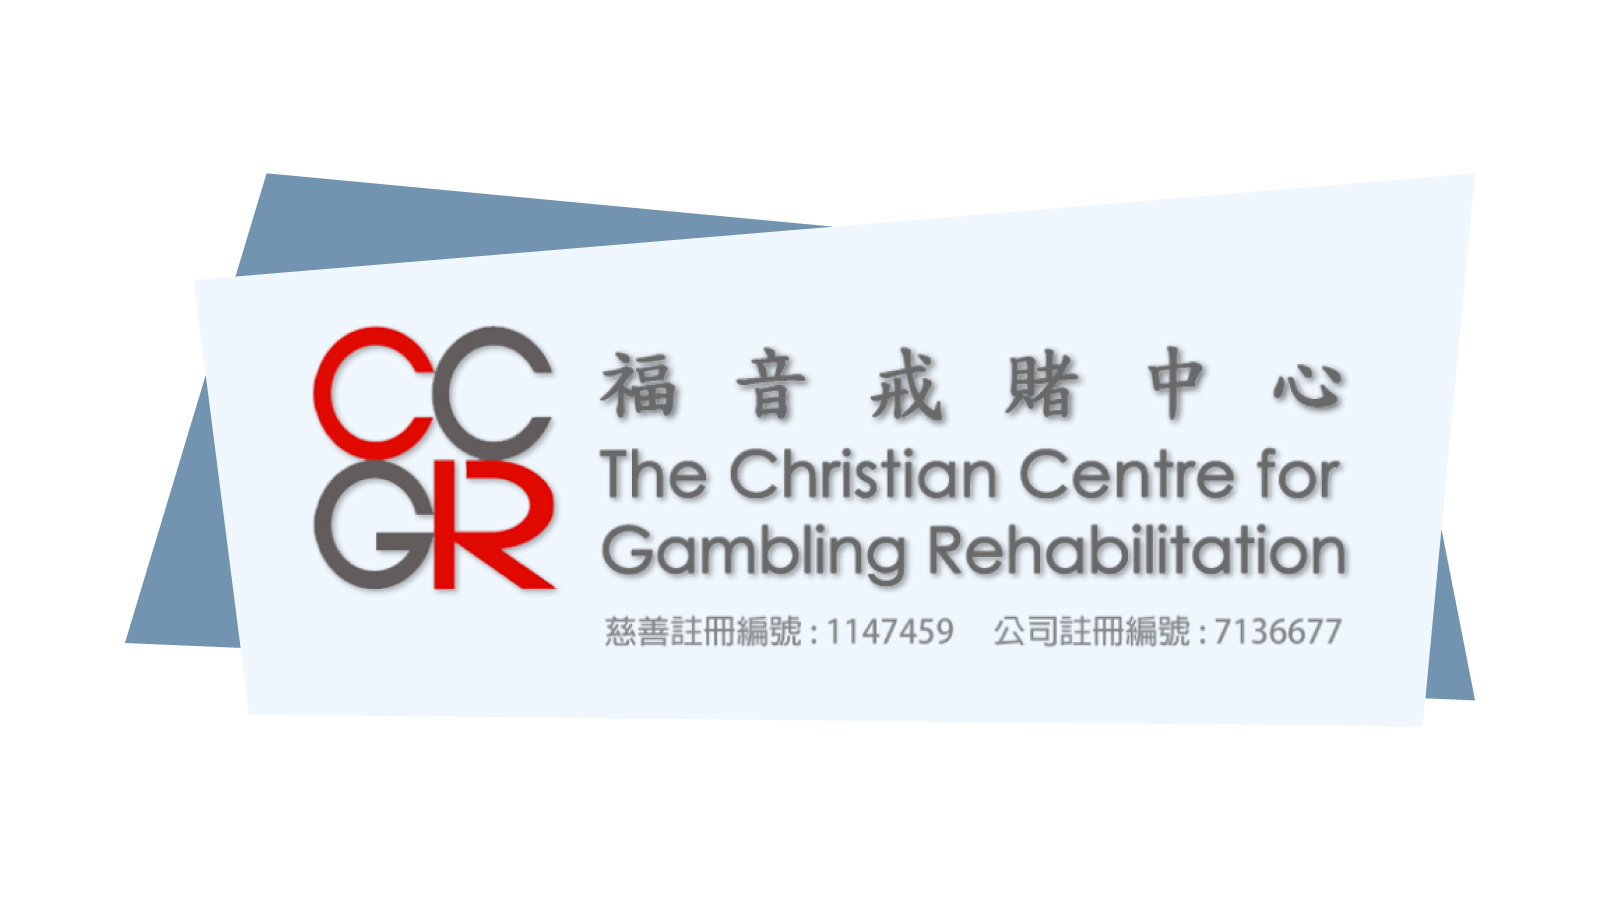 The Christian Centre for Gambling Rehabilitation Limited